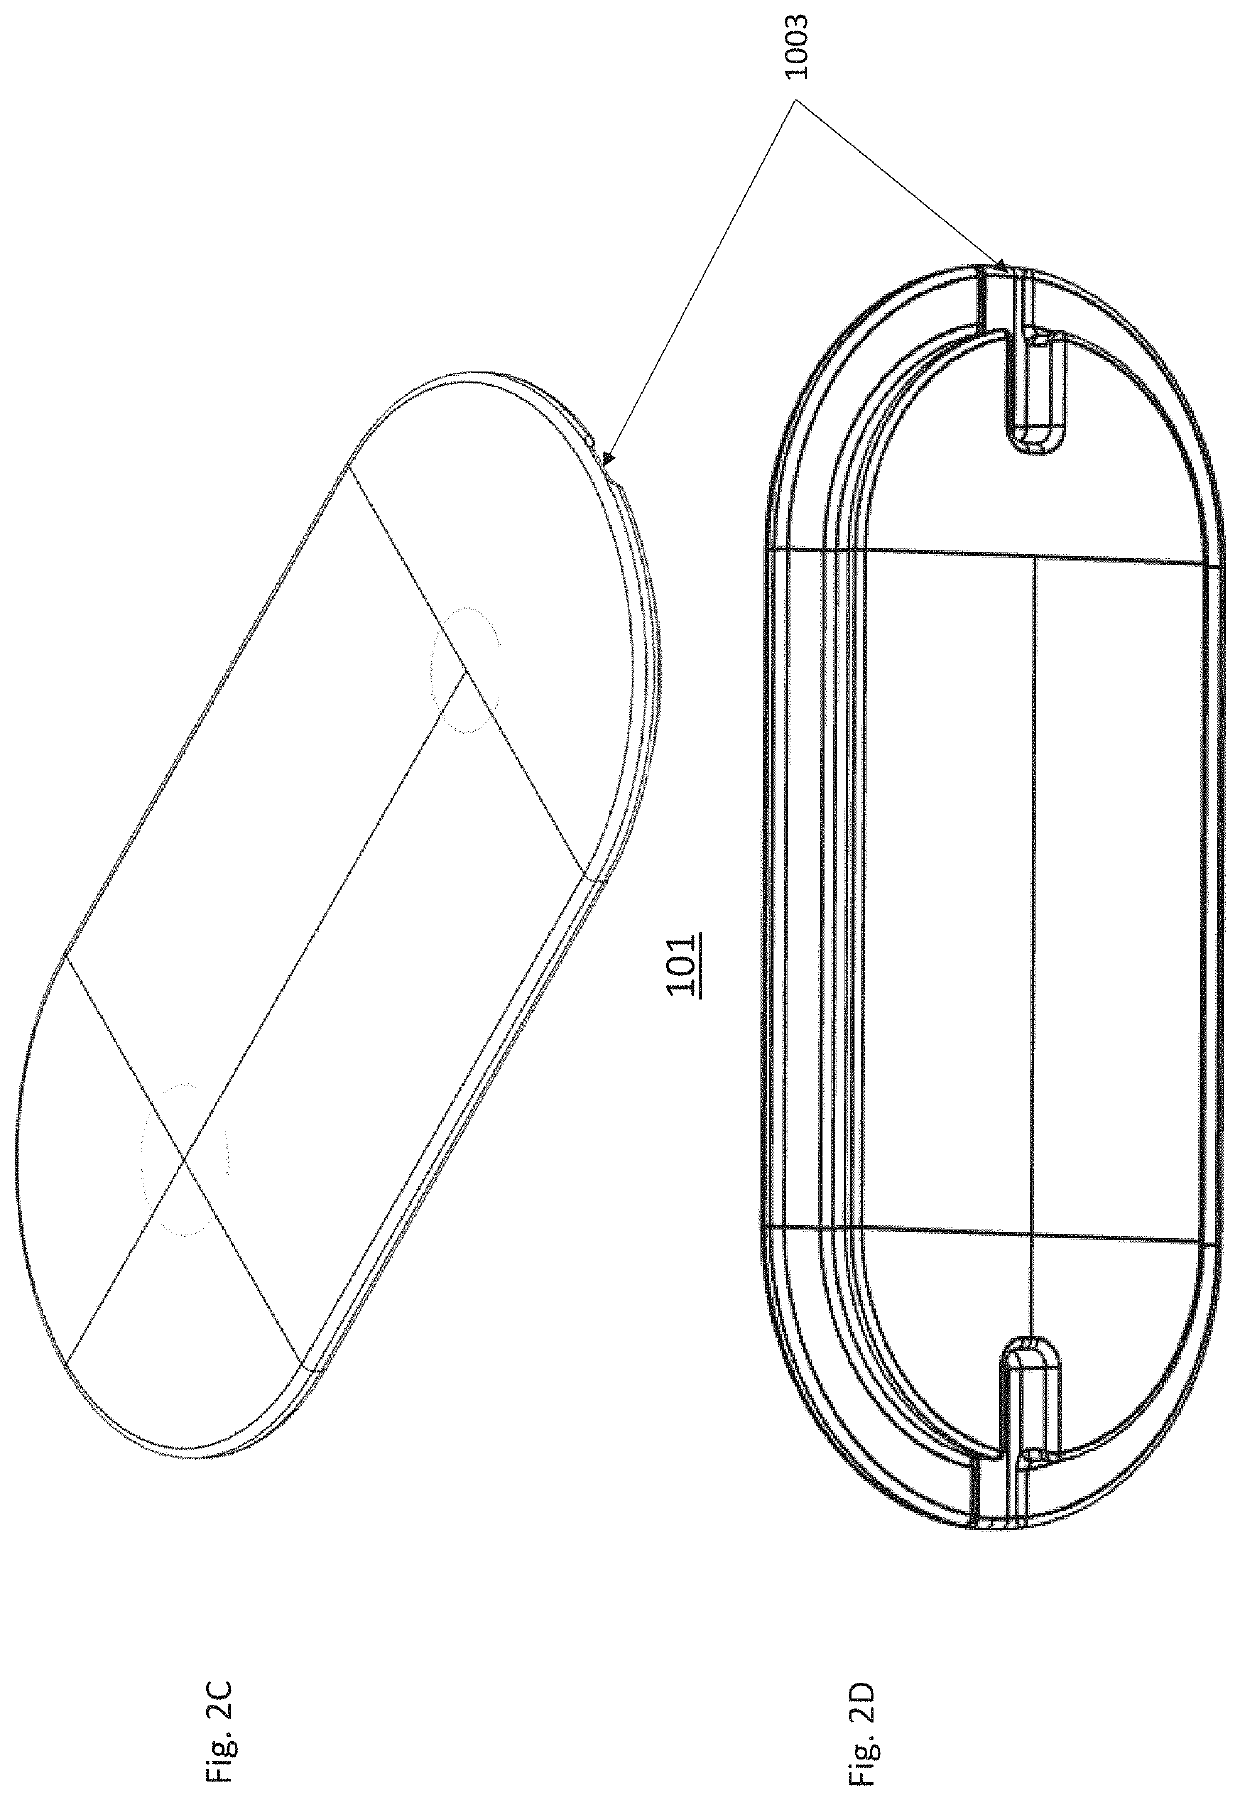 Oral fluid collection device